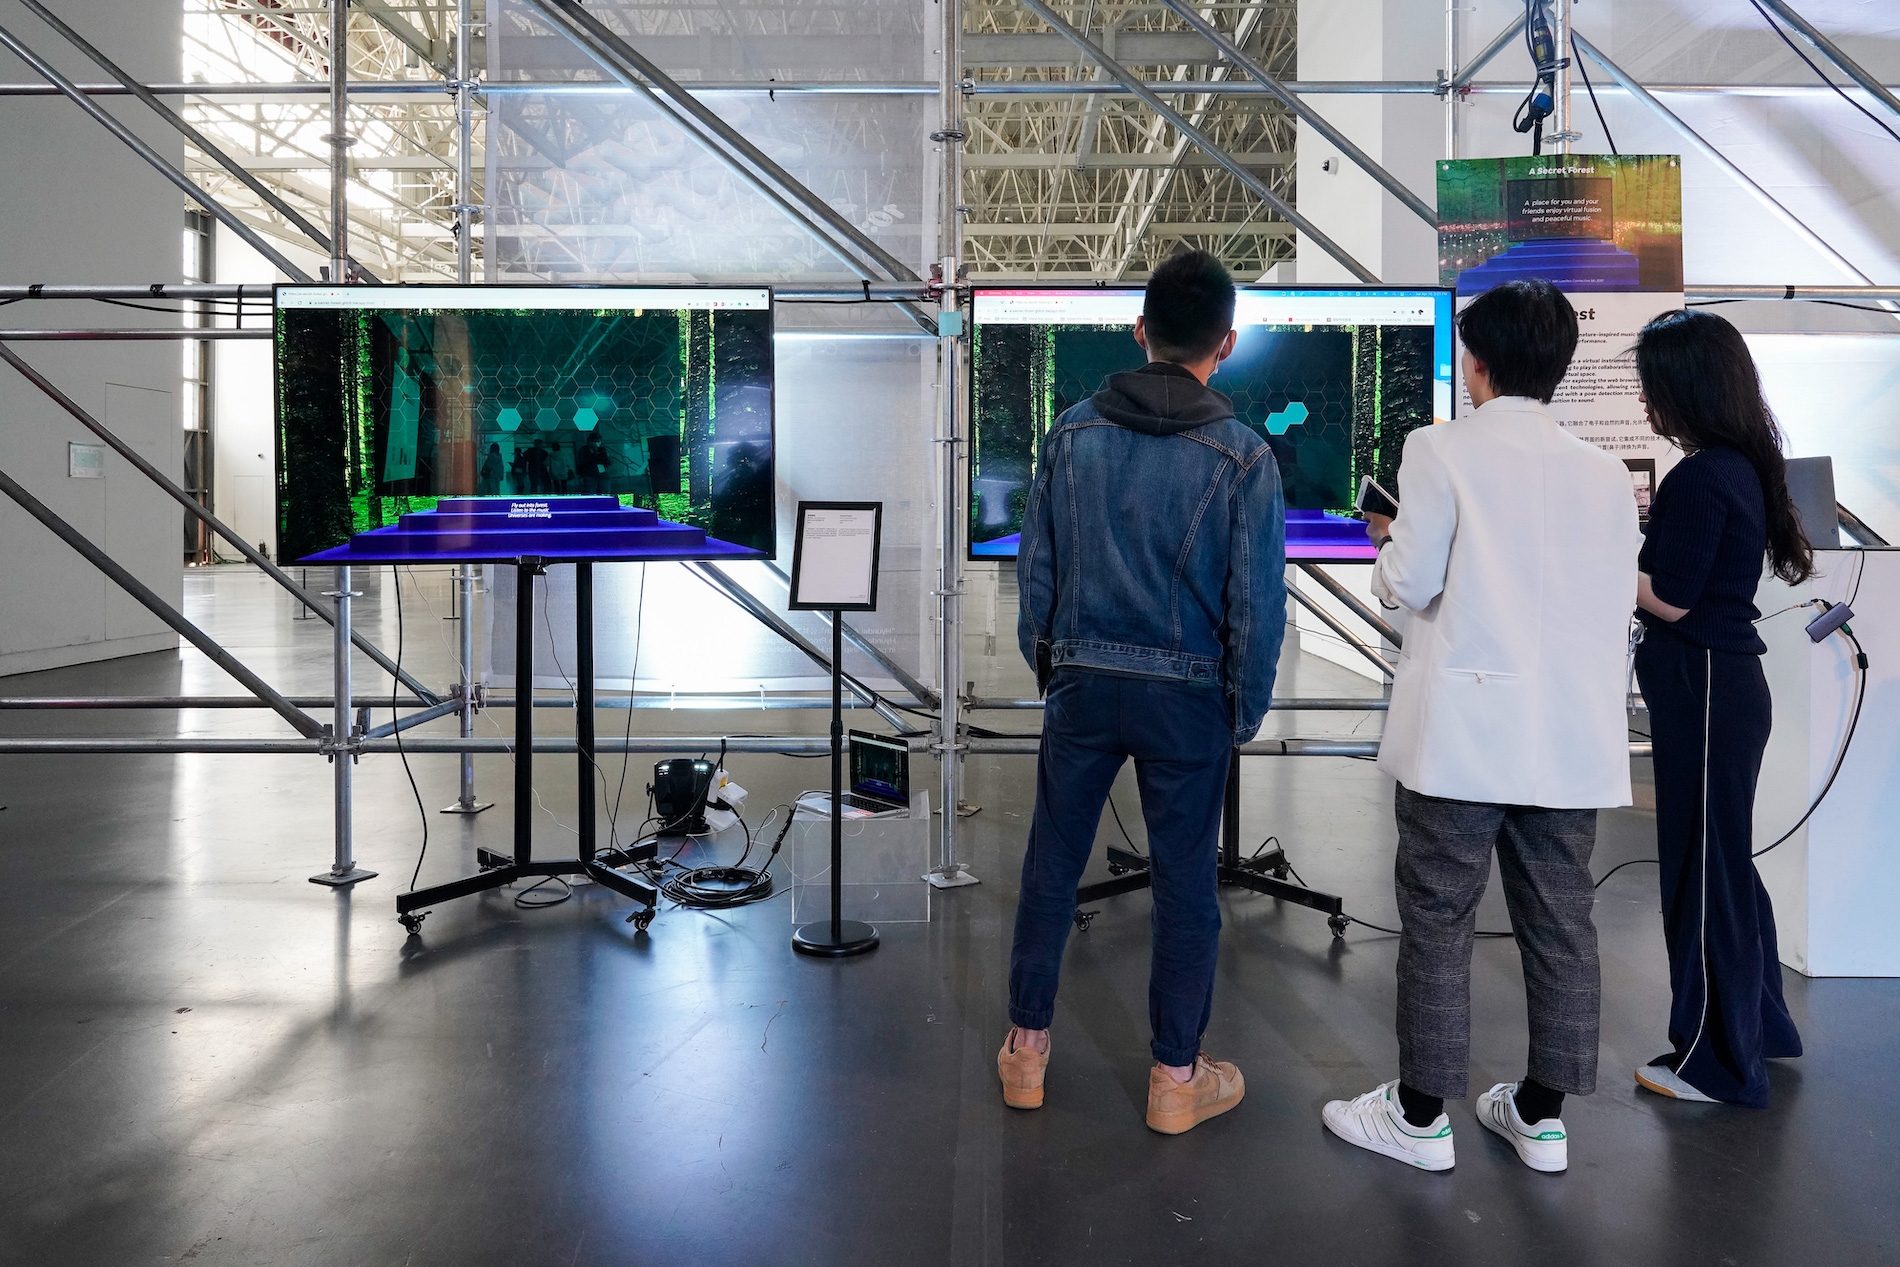 Two young men and a young woman stand with their backs to the camera as they watch two large screens display computer generated imagery